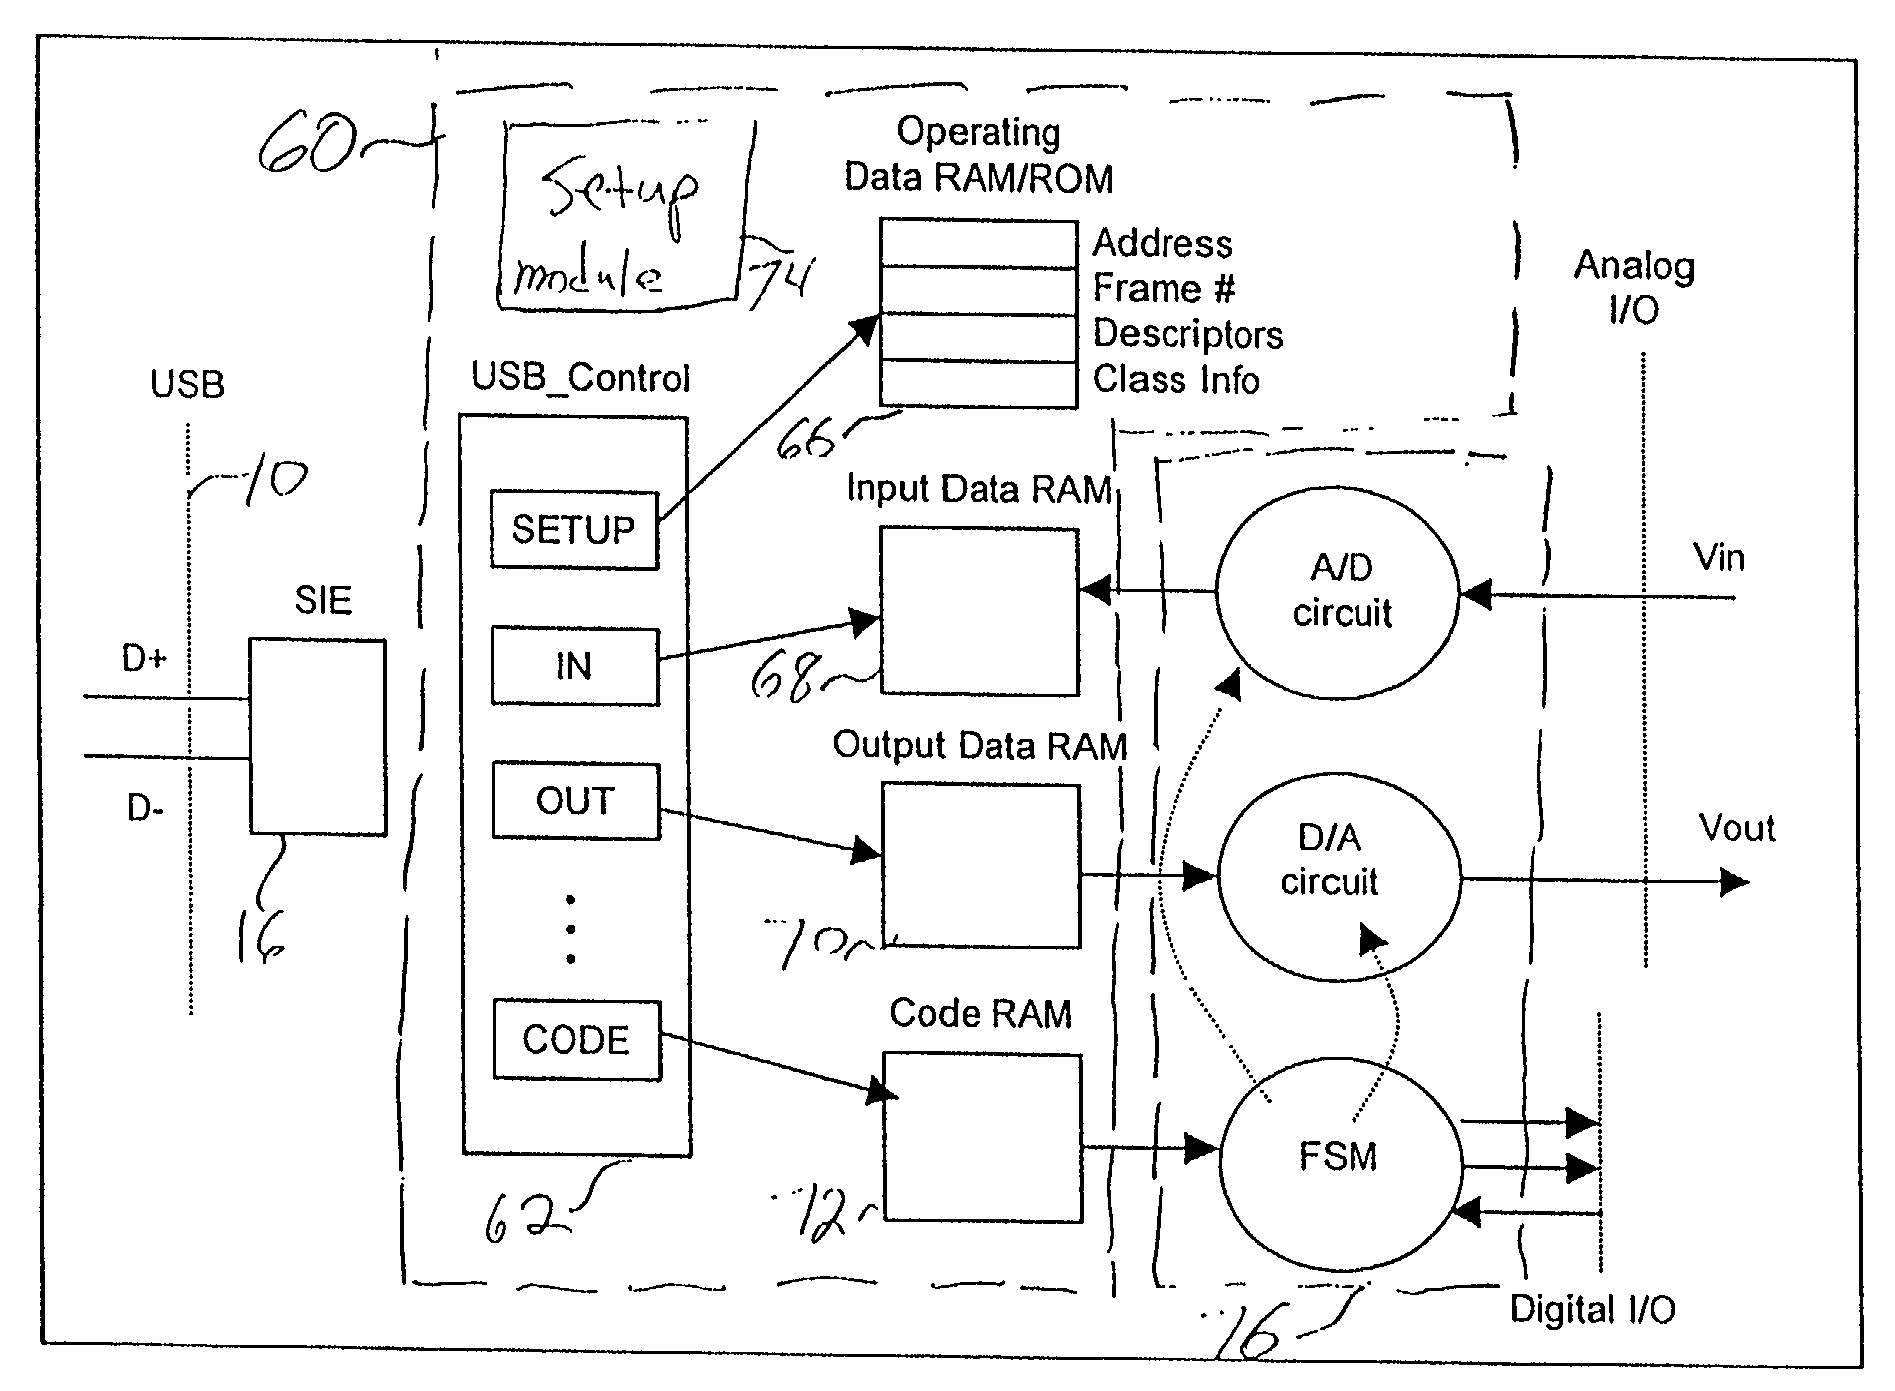 Configuration selection for USB device controller